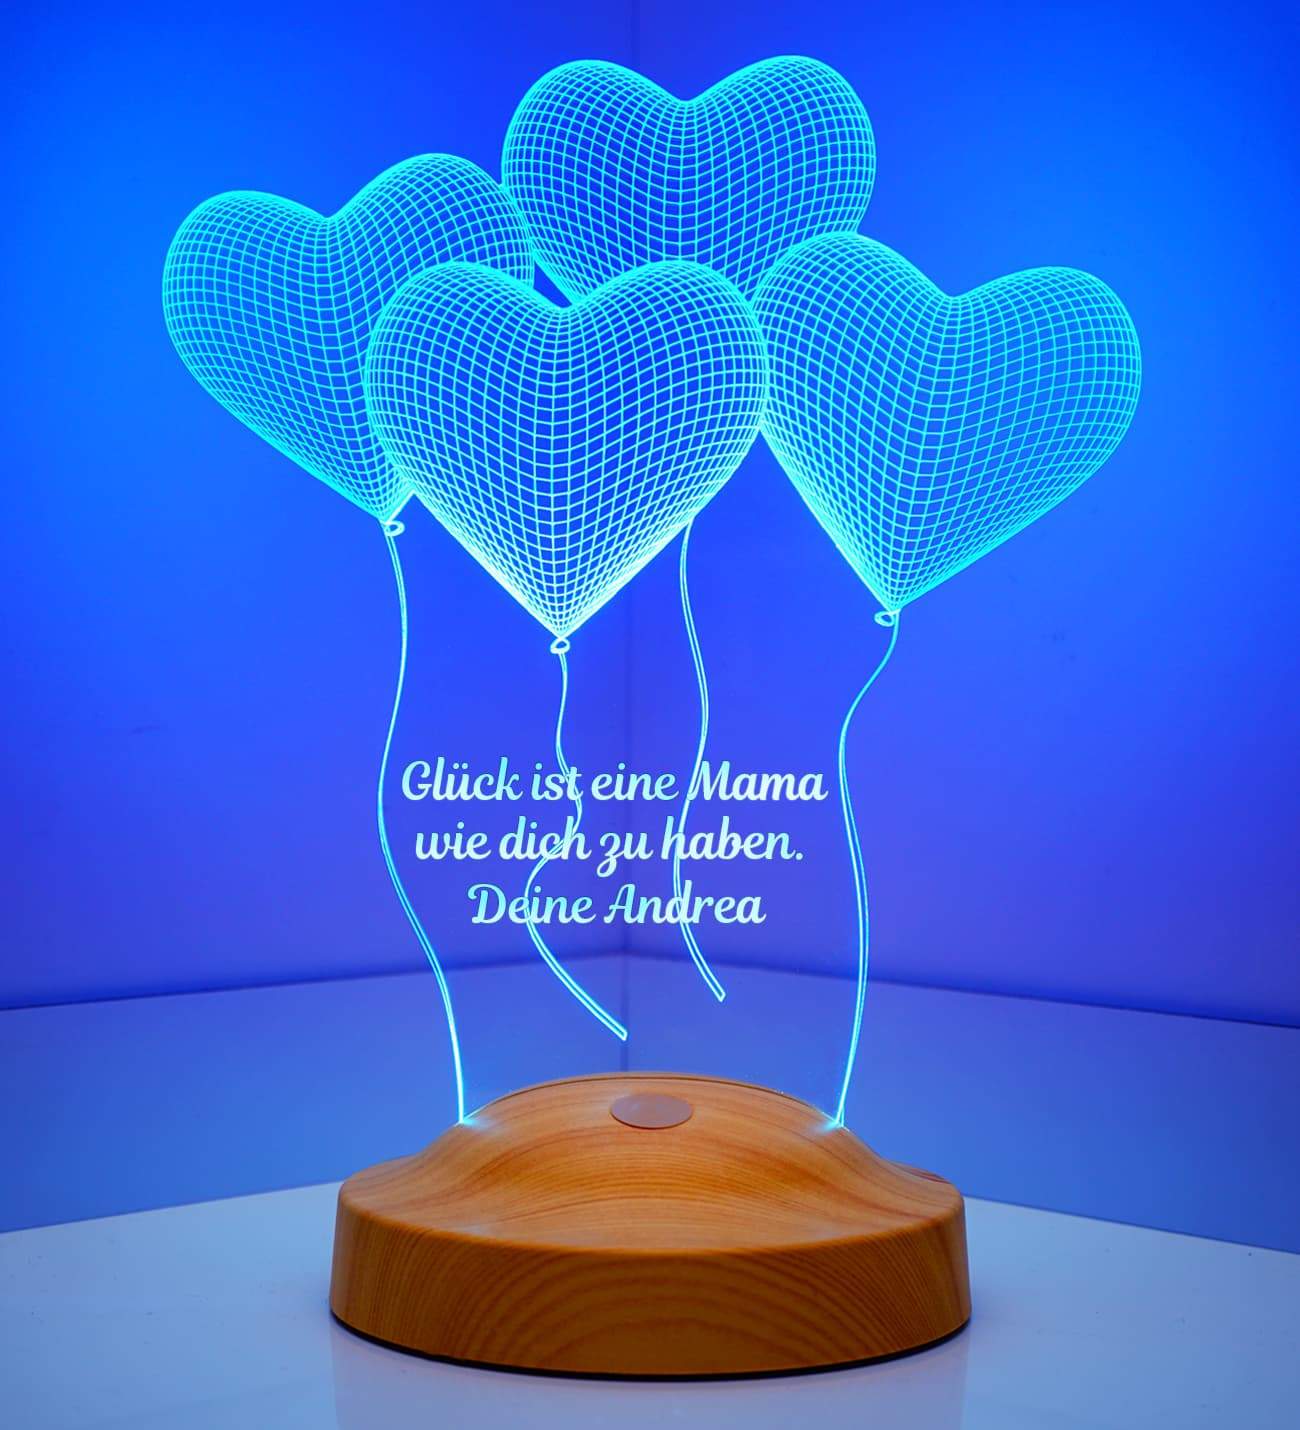 Four Hearts Personalized Mother's Day Gifts Lamp with text of your choice